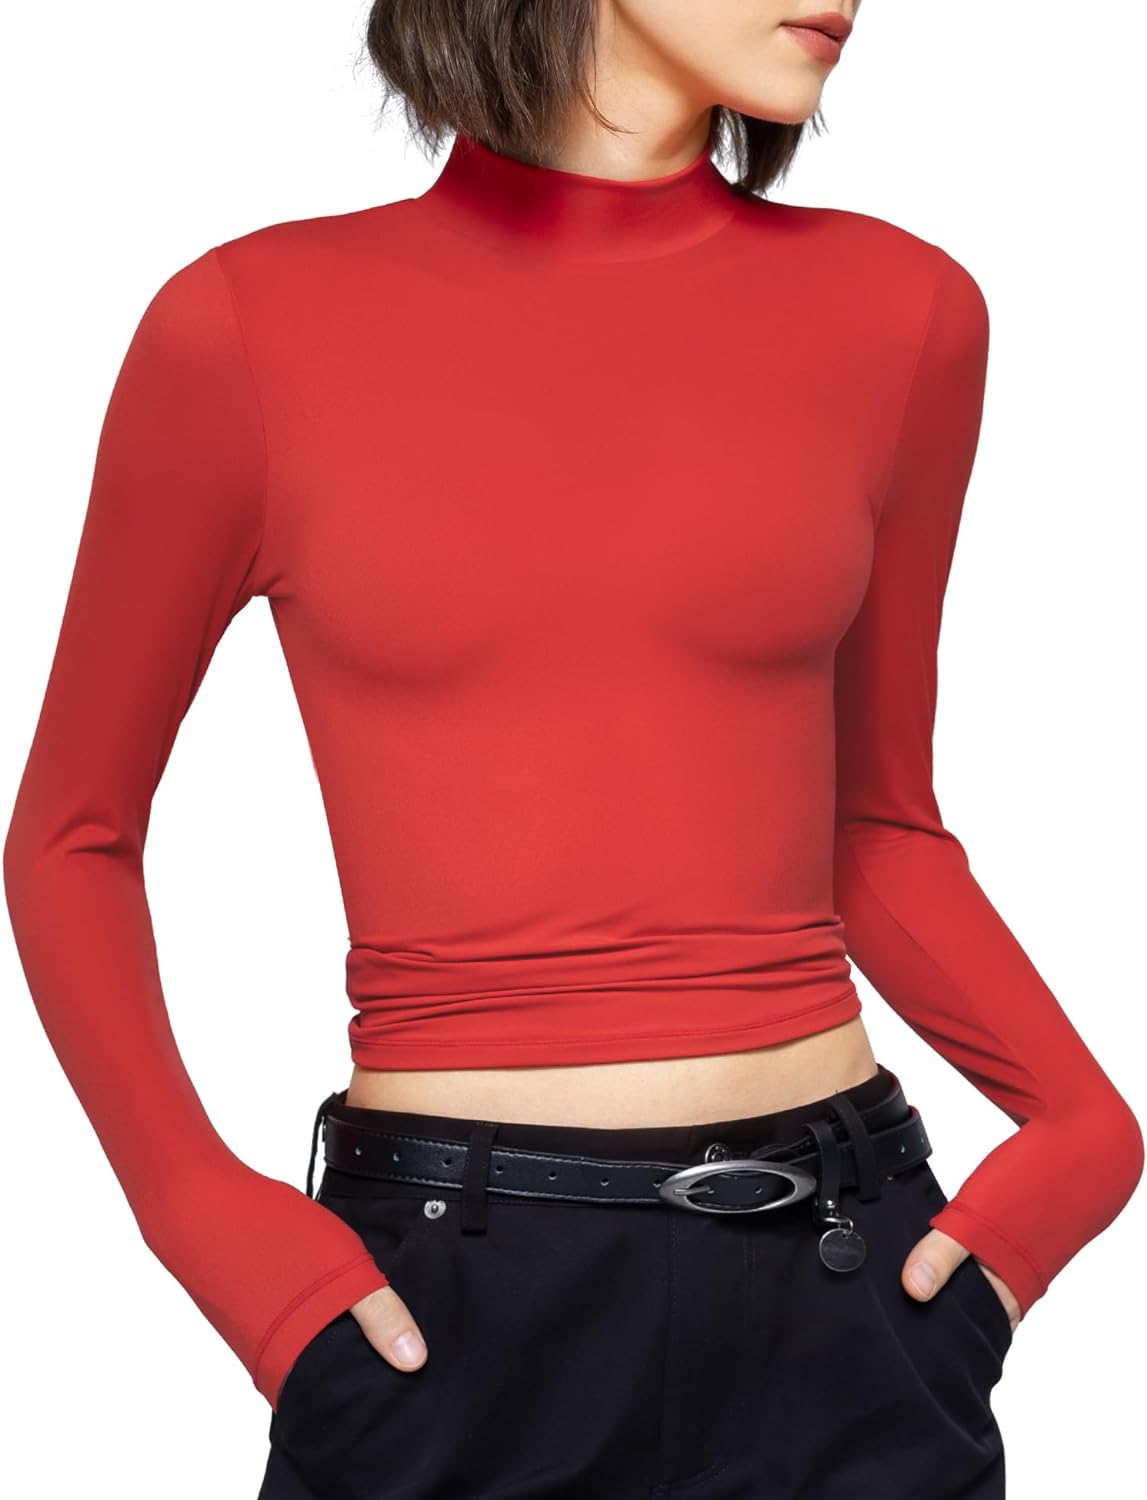 PUMIEY Women's Long Sleeve T Shirts Mock Turtleneck Slim Fit Tops Sexy  Basic Tee